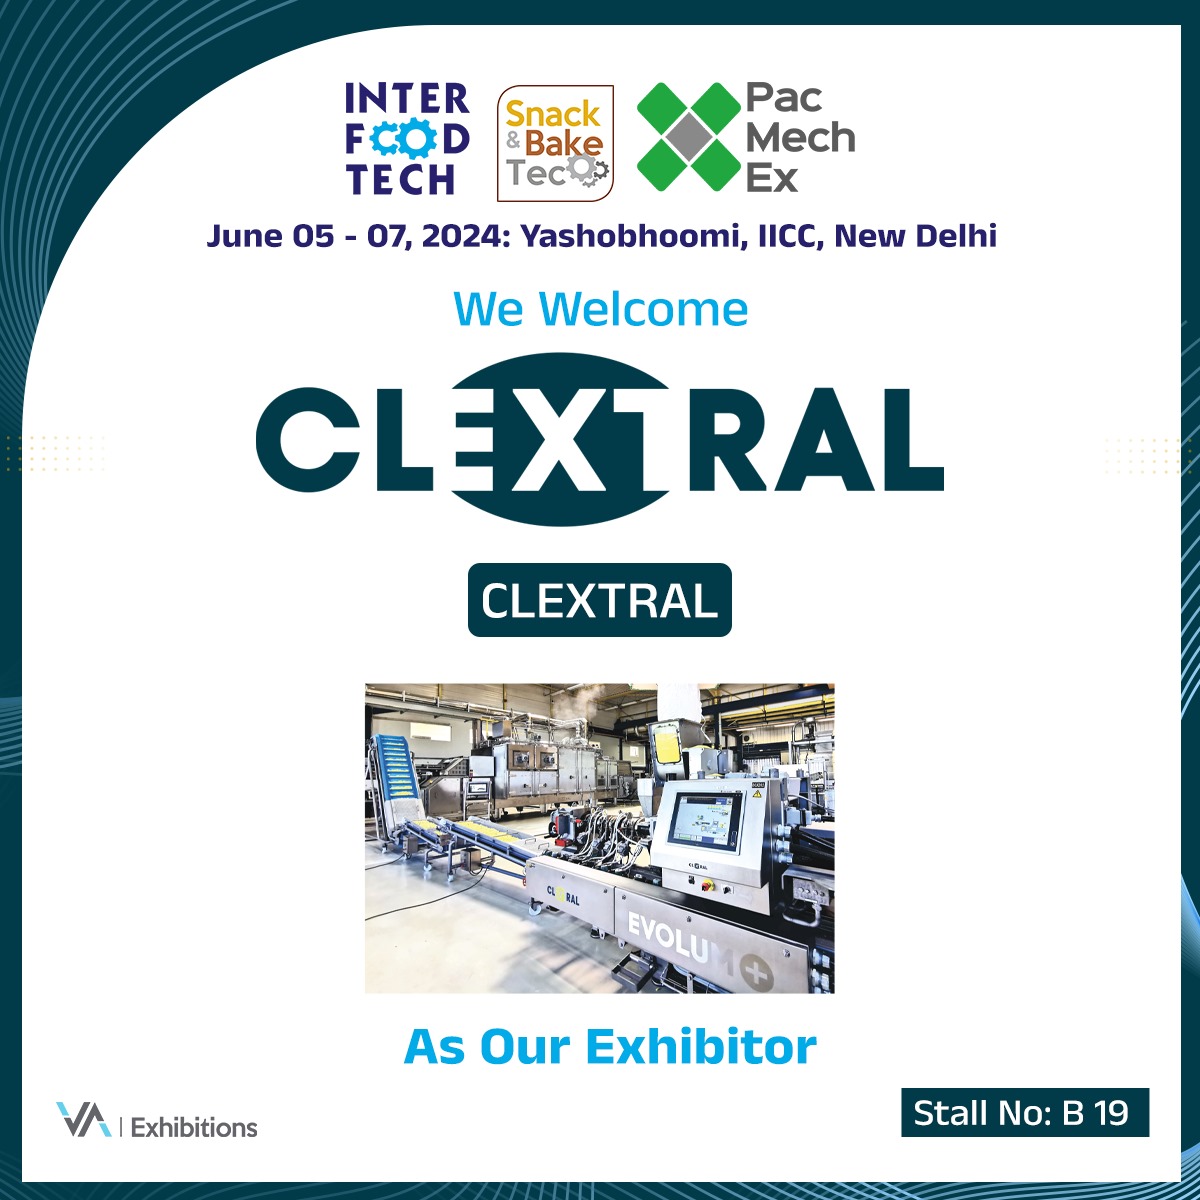 We are honored to announce #Clextral as our distinguished #exhibitor.

With an impressive legacy of 70 years, Clextral stands at the forefront of #extrusiontechnology innovation for smart industries.

#InterFoodTech2024 #FoodTechInnovation